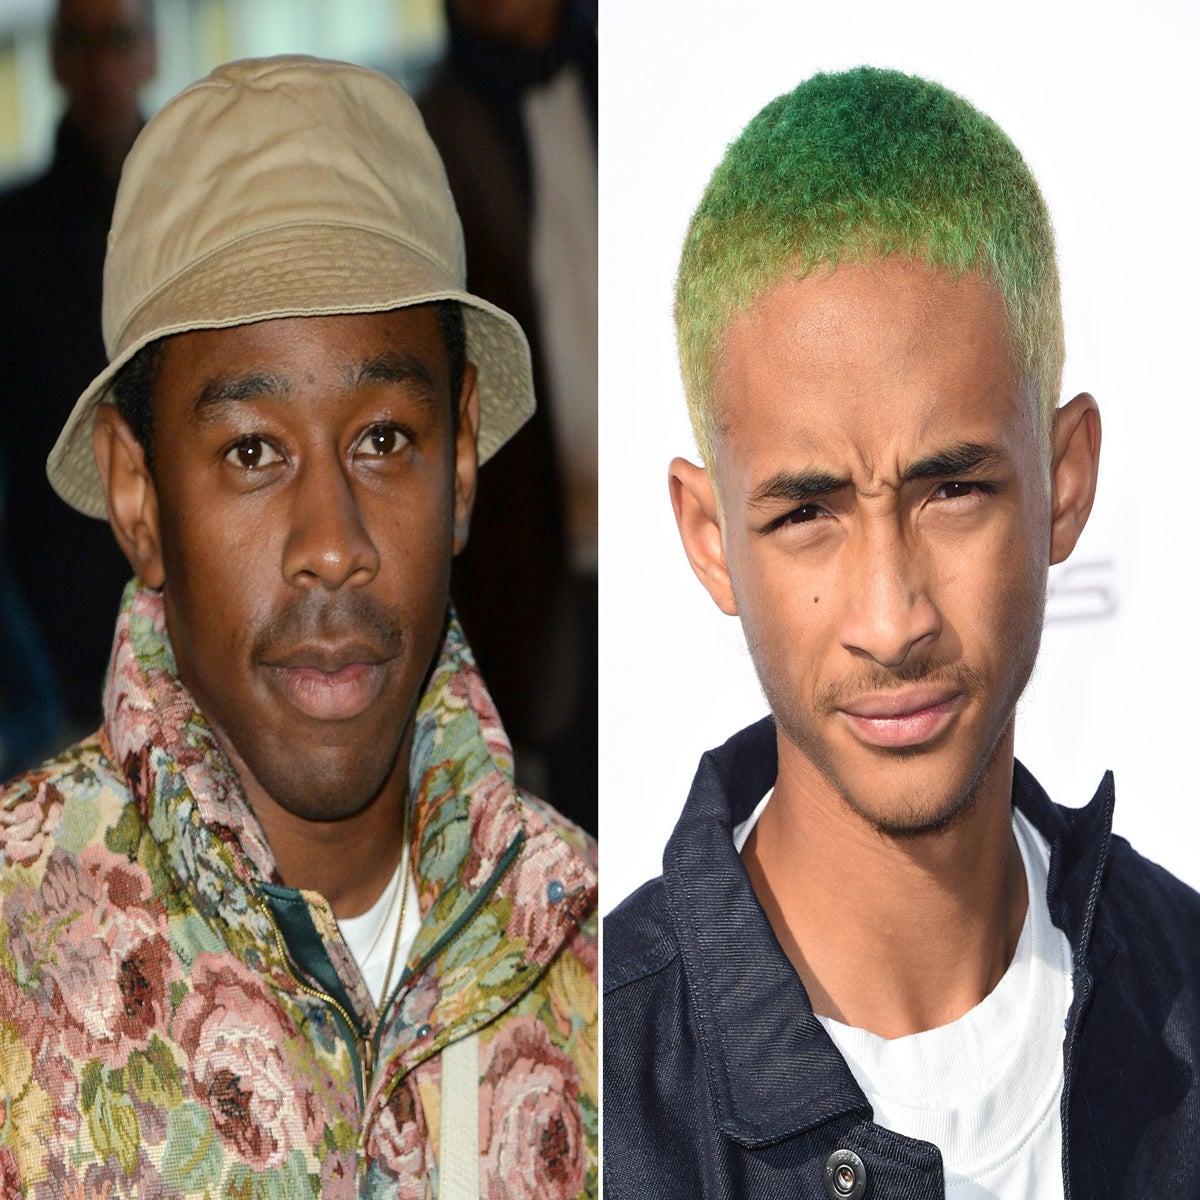 Tyler, the Creator's New Look Is Not to be Slept On